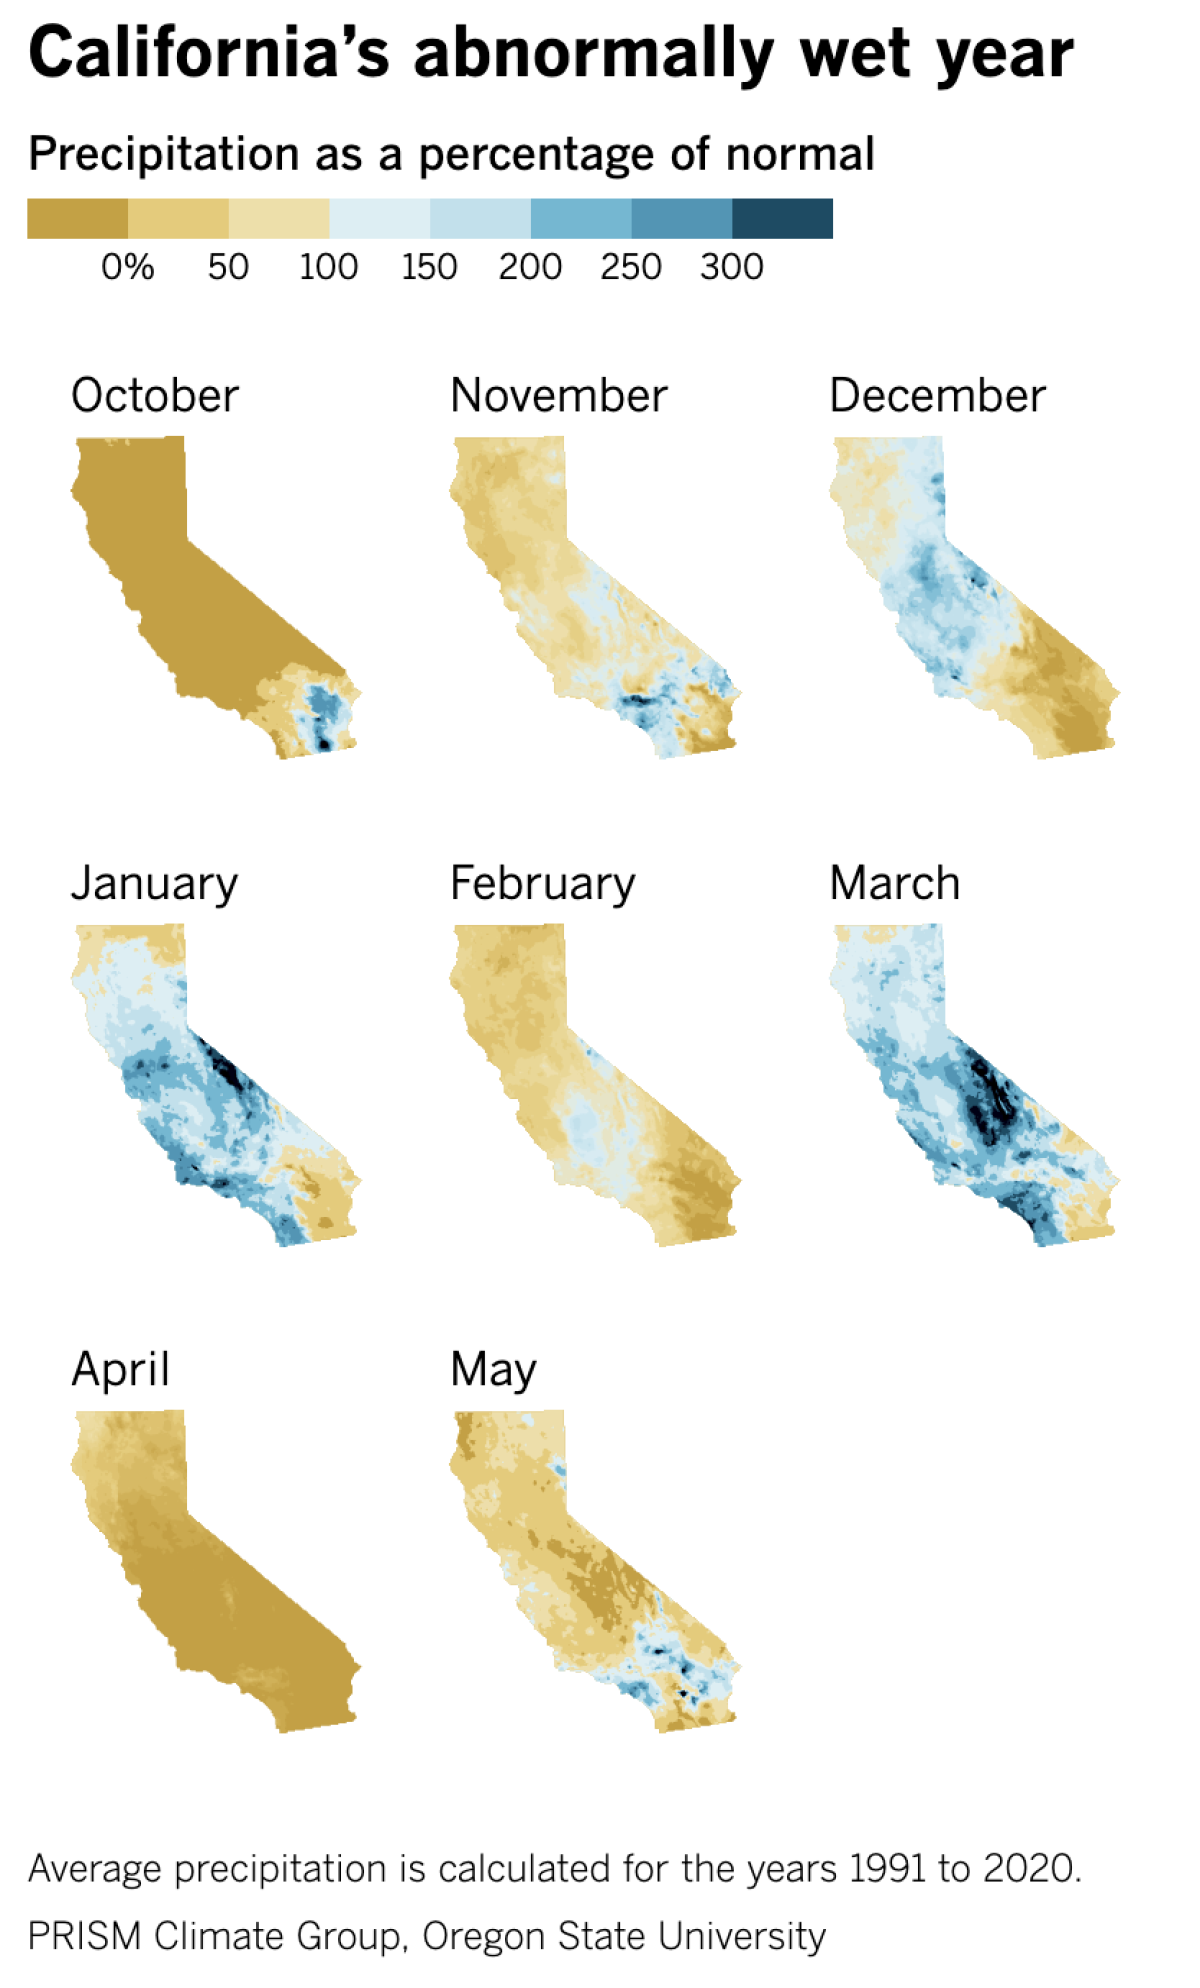 Monthly color-coded precipitation maps illustrate California's rains between October and May